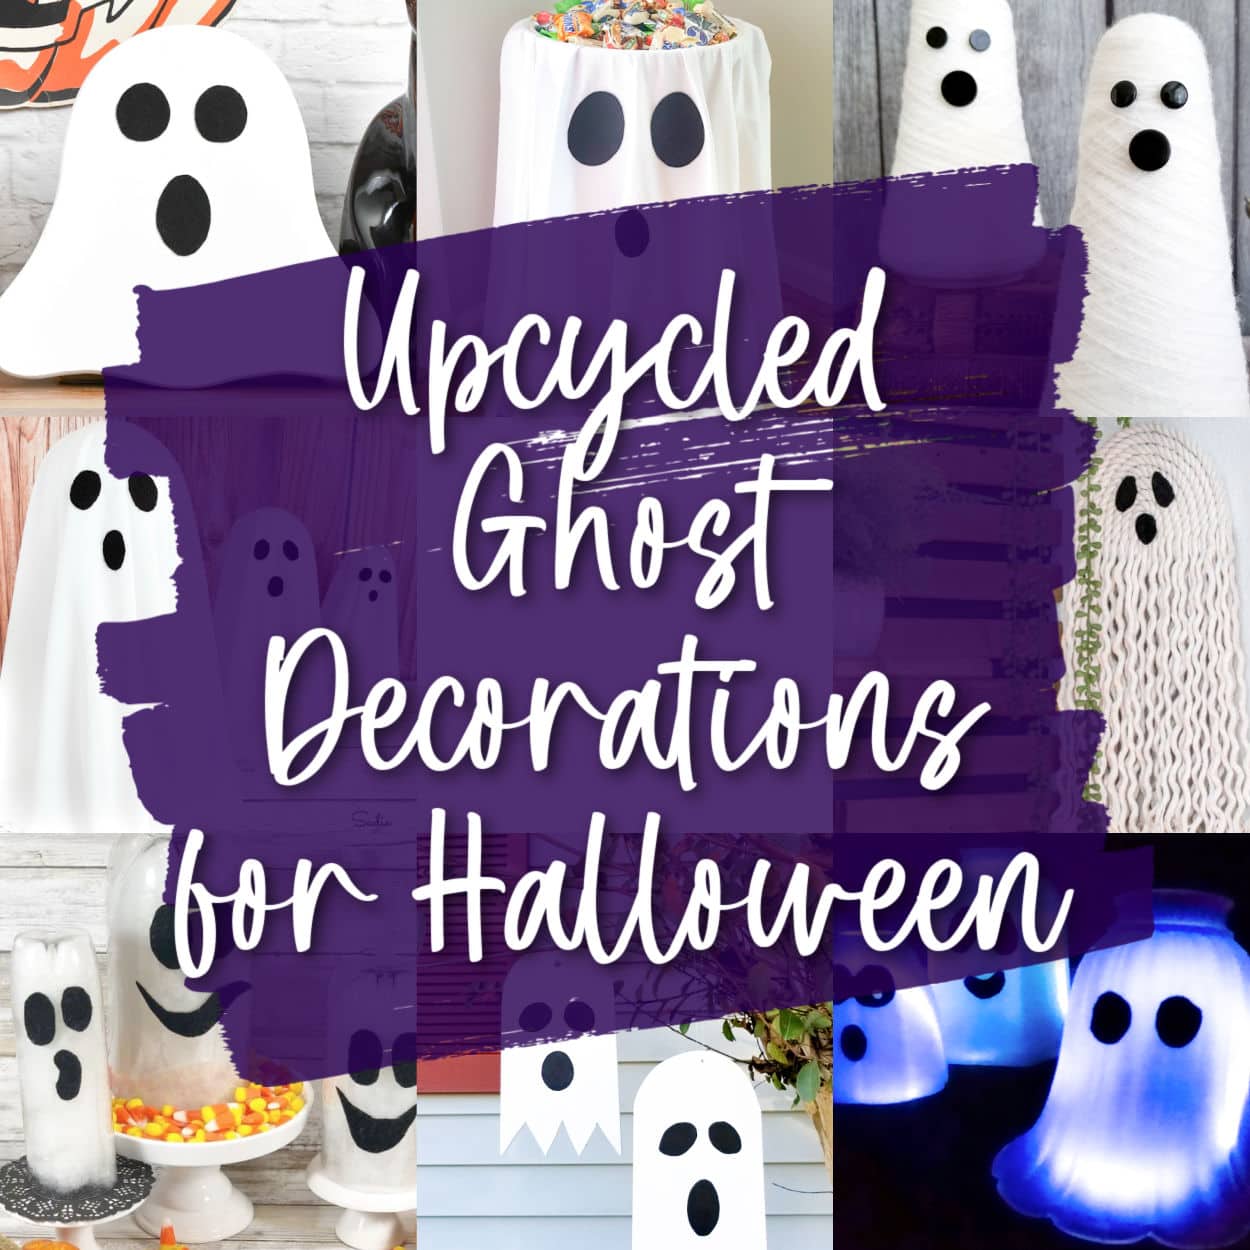 Upcycling Ideas for Halloween Ghost Decorations